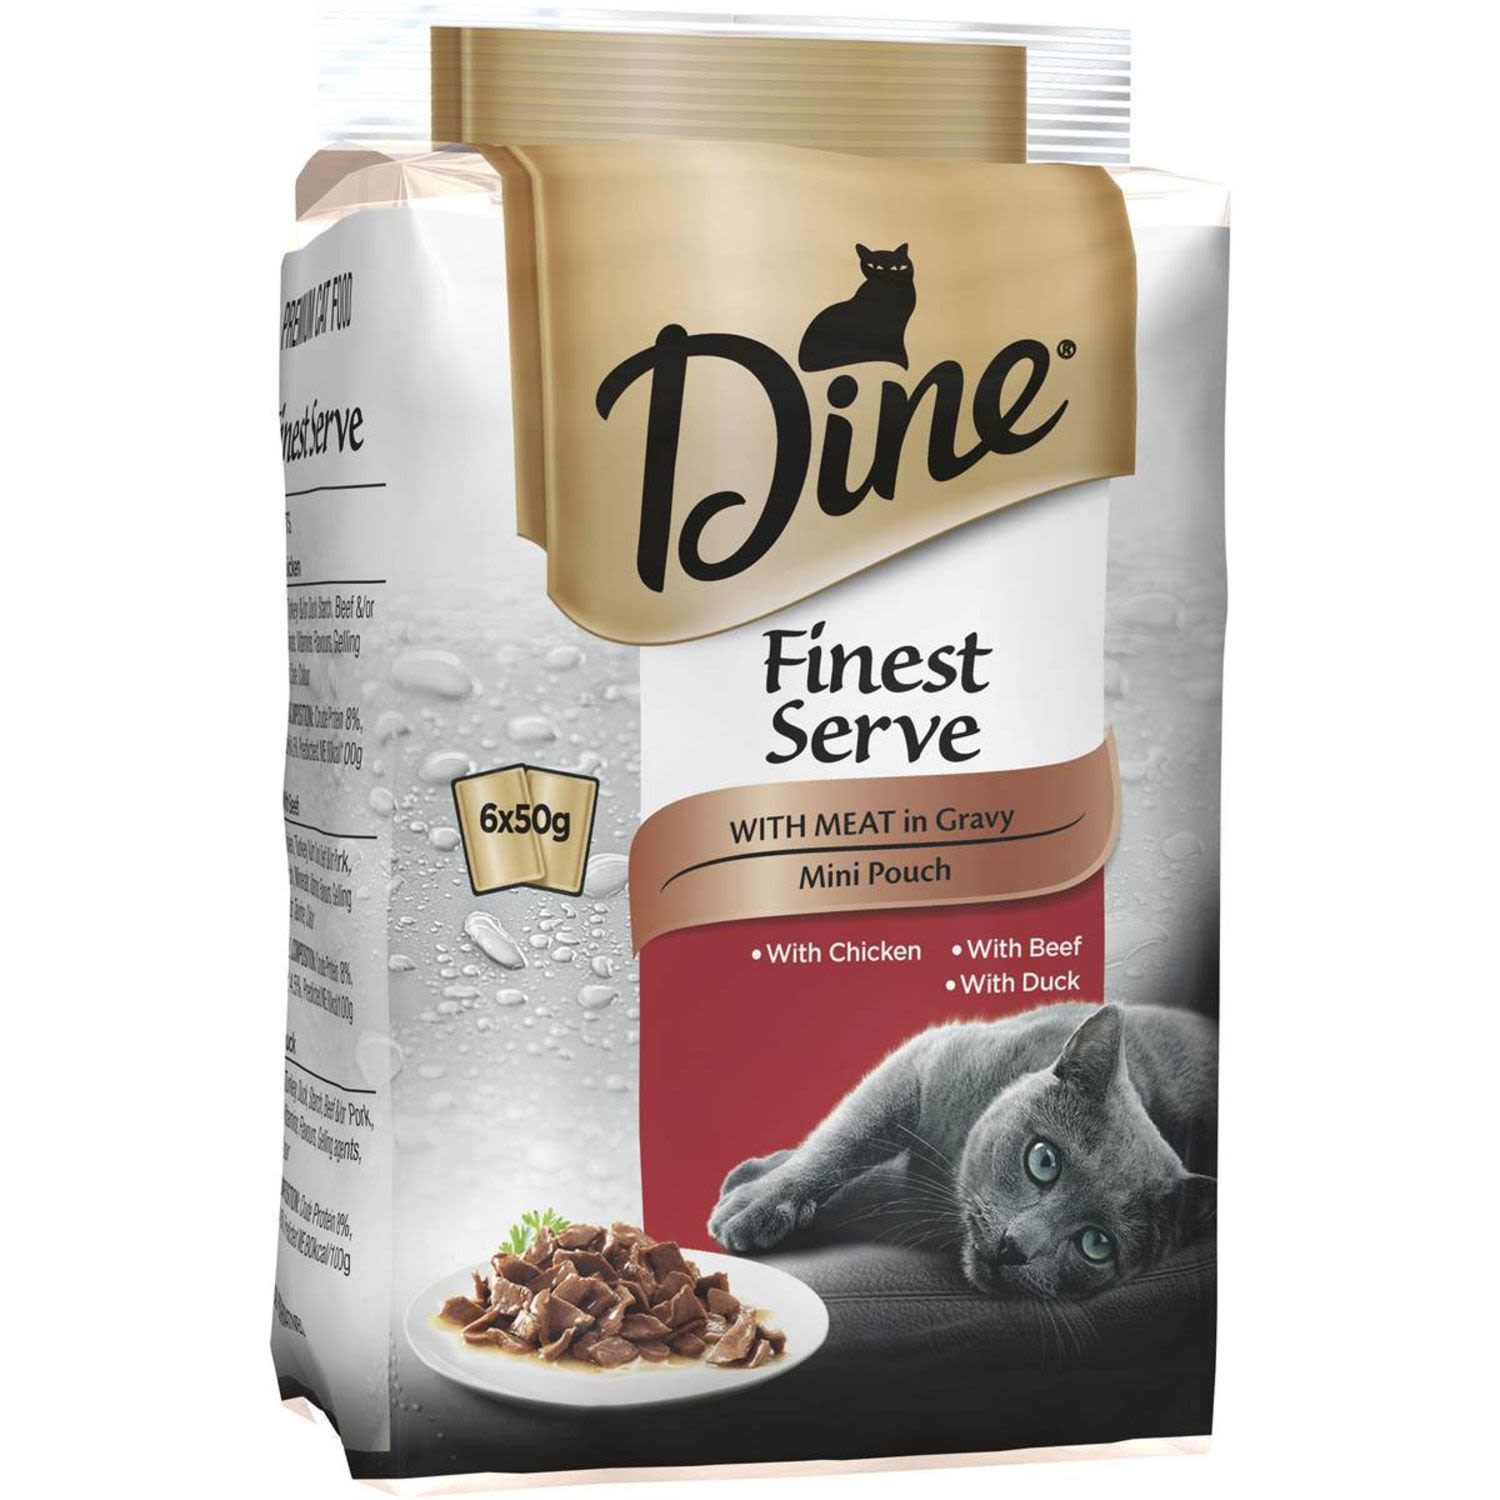 Dine Finest Serve With Meat In Gravy Wet Cat Food Mini Pouch, 6 Each